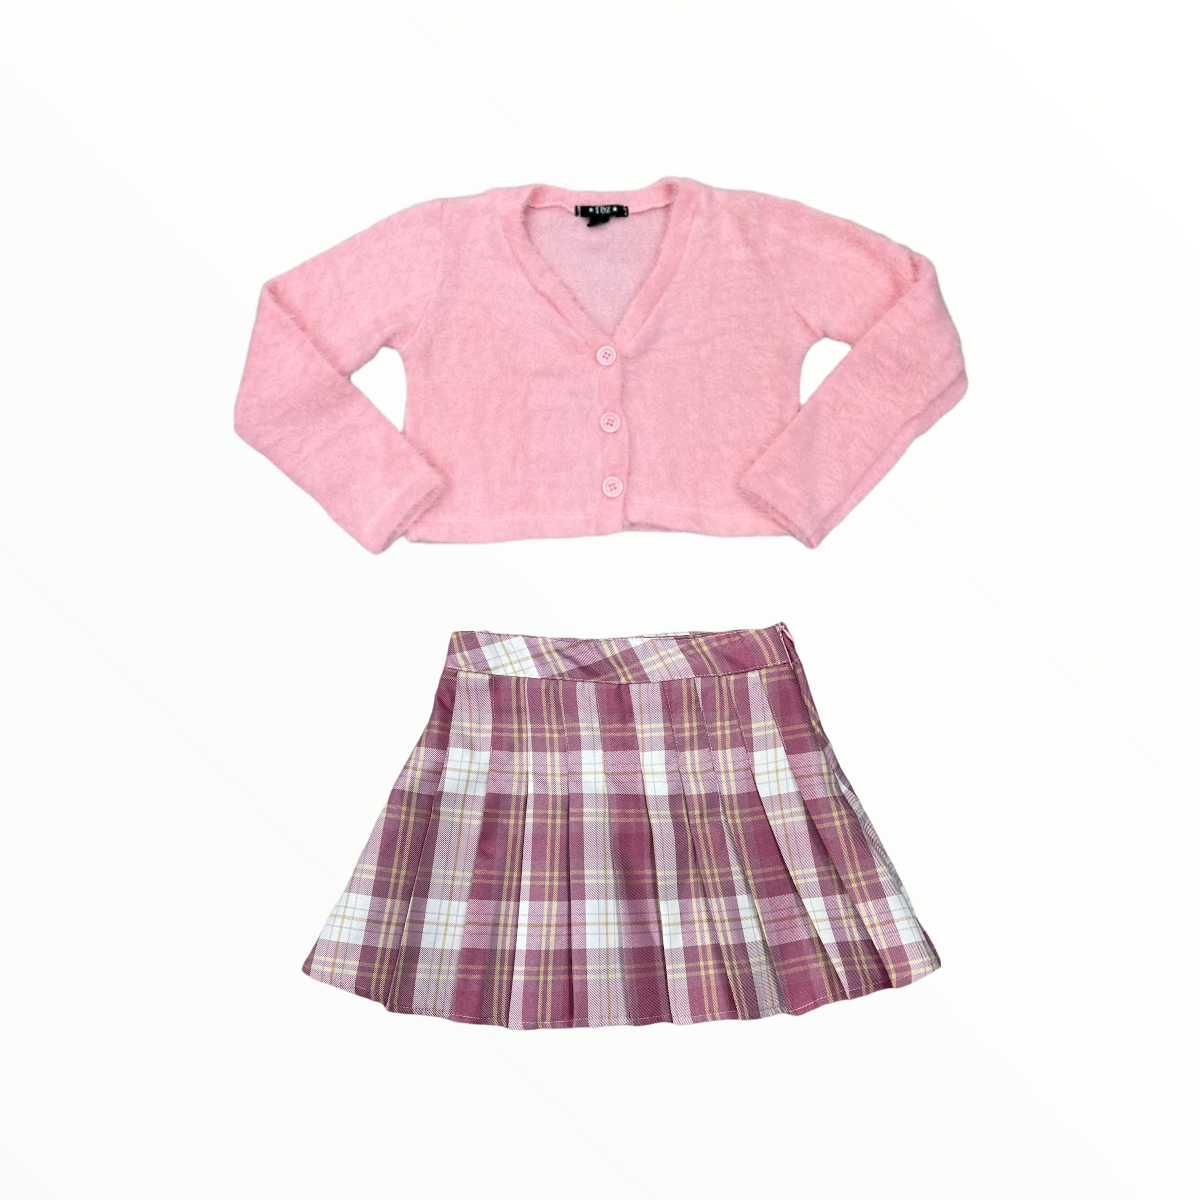 FLOWERS BY ZOE PLEATED SKIRT - PINK PLAID